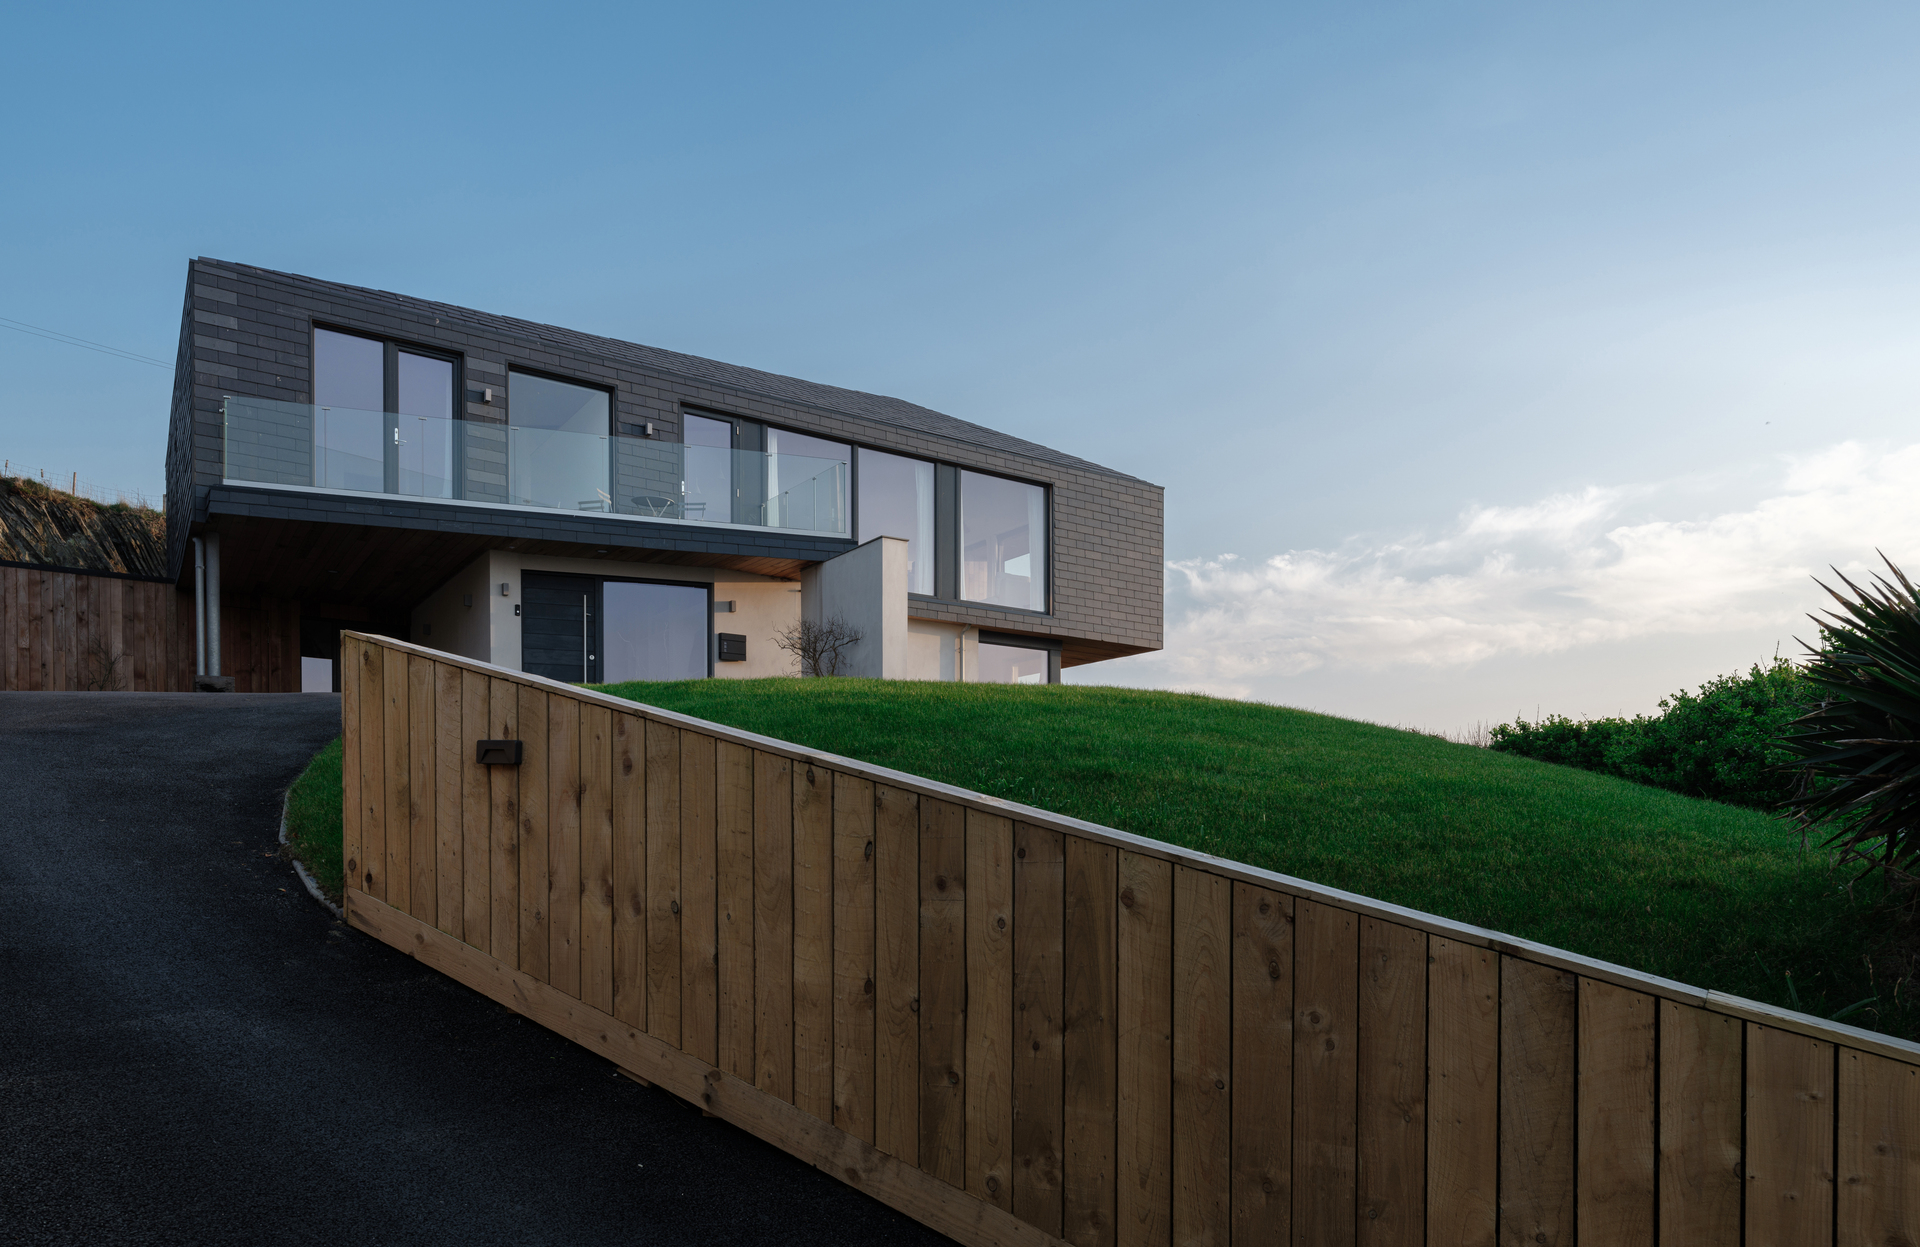 CUPACLAD PROVIDES THE NATURAL SOLUTION FOR NEW COASTAL HOME